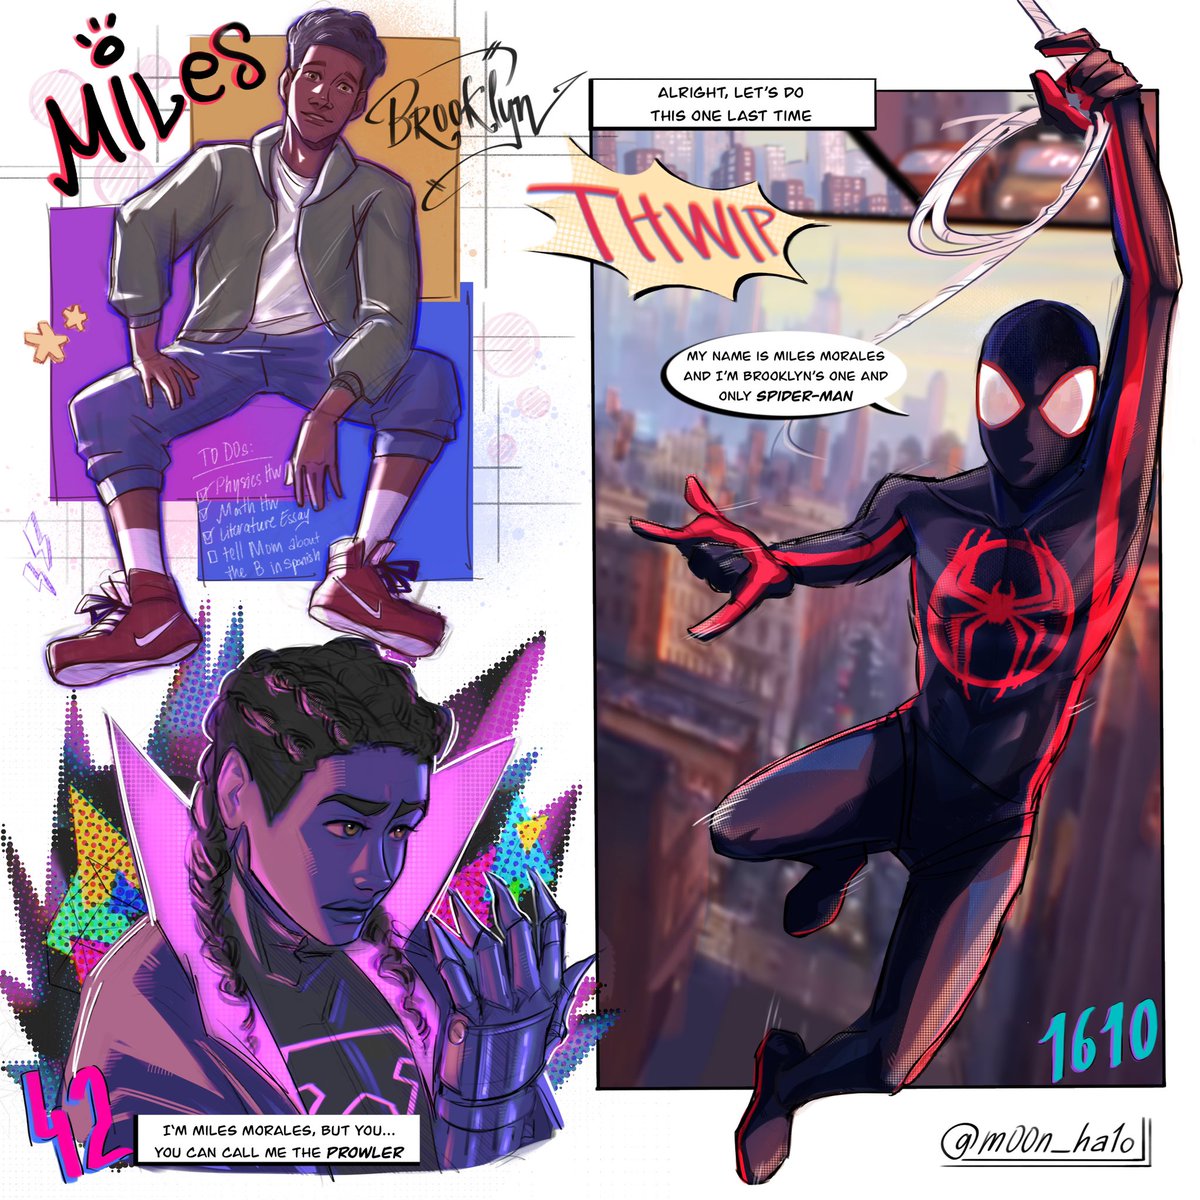 Style exploration with Mr. Anomaly
#SPIDERVERSE #AcrossTheSpiderVerse #acrossthespiderversefanart #MilesMorales #ProwlerMiles #fanart #ArtistOnTwitter